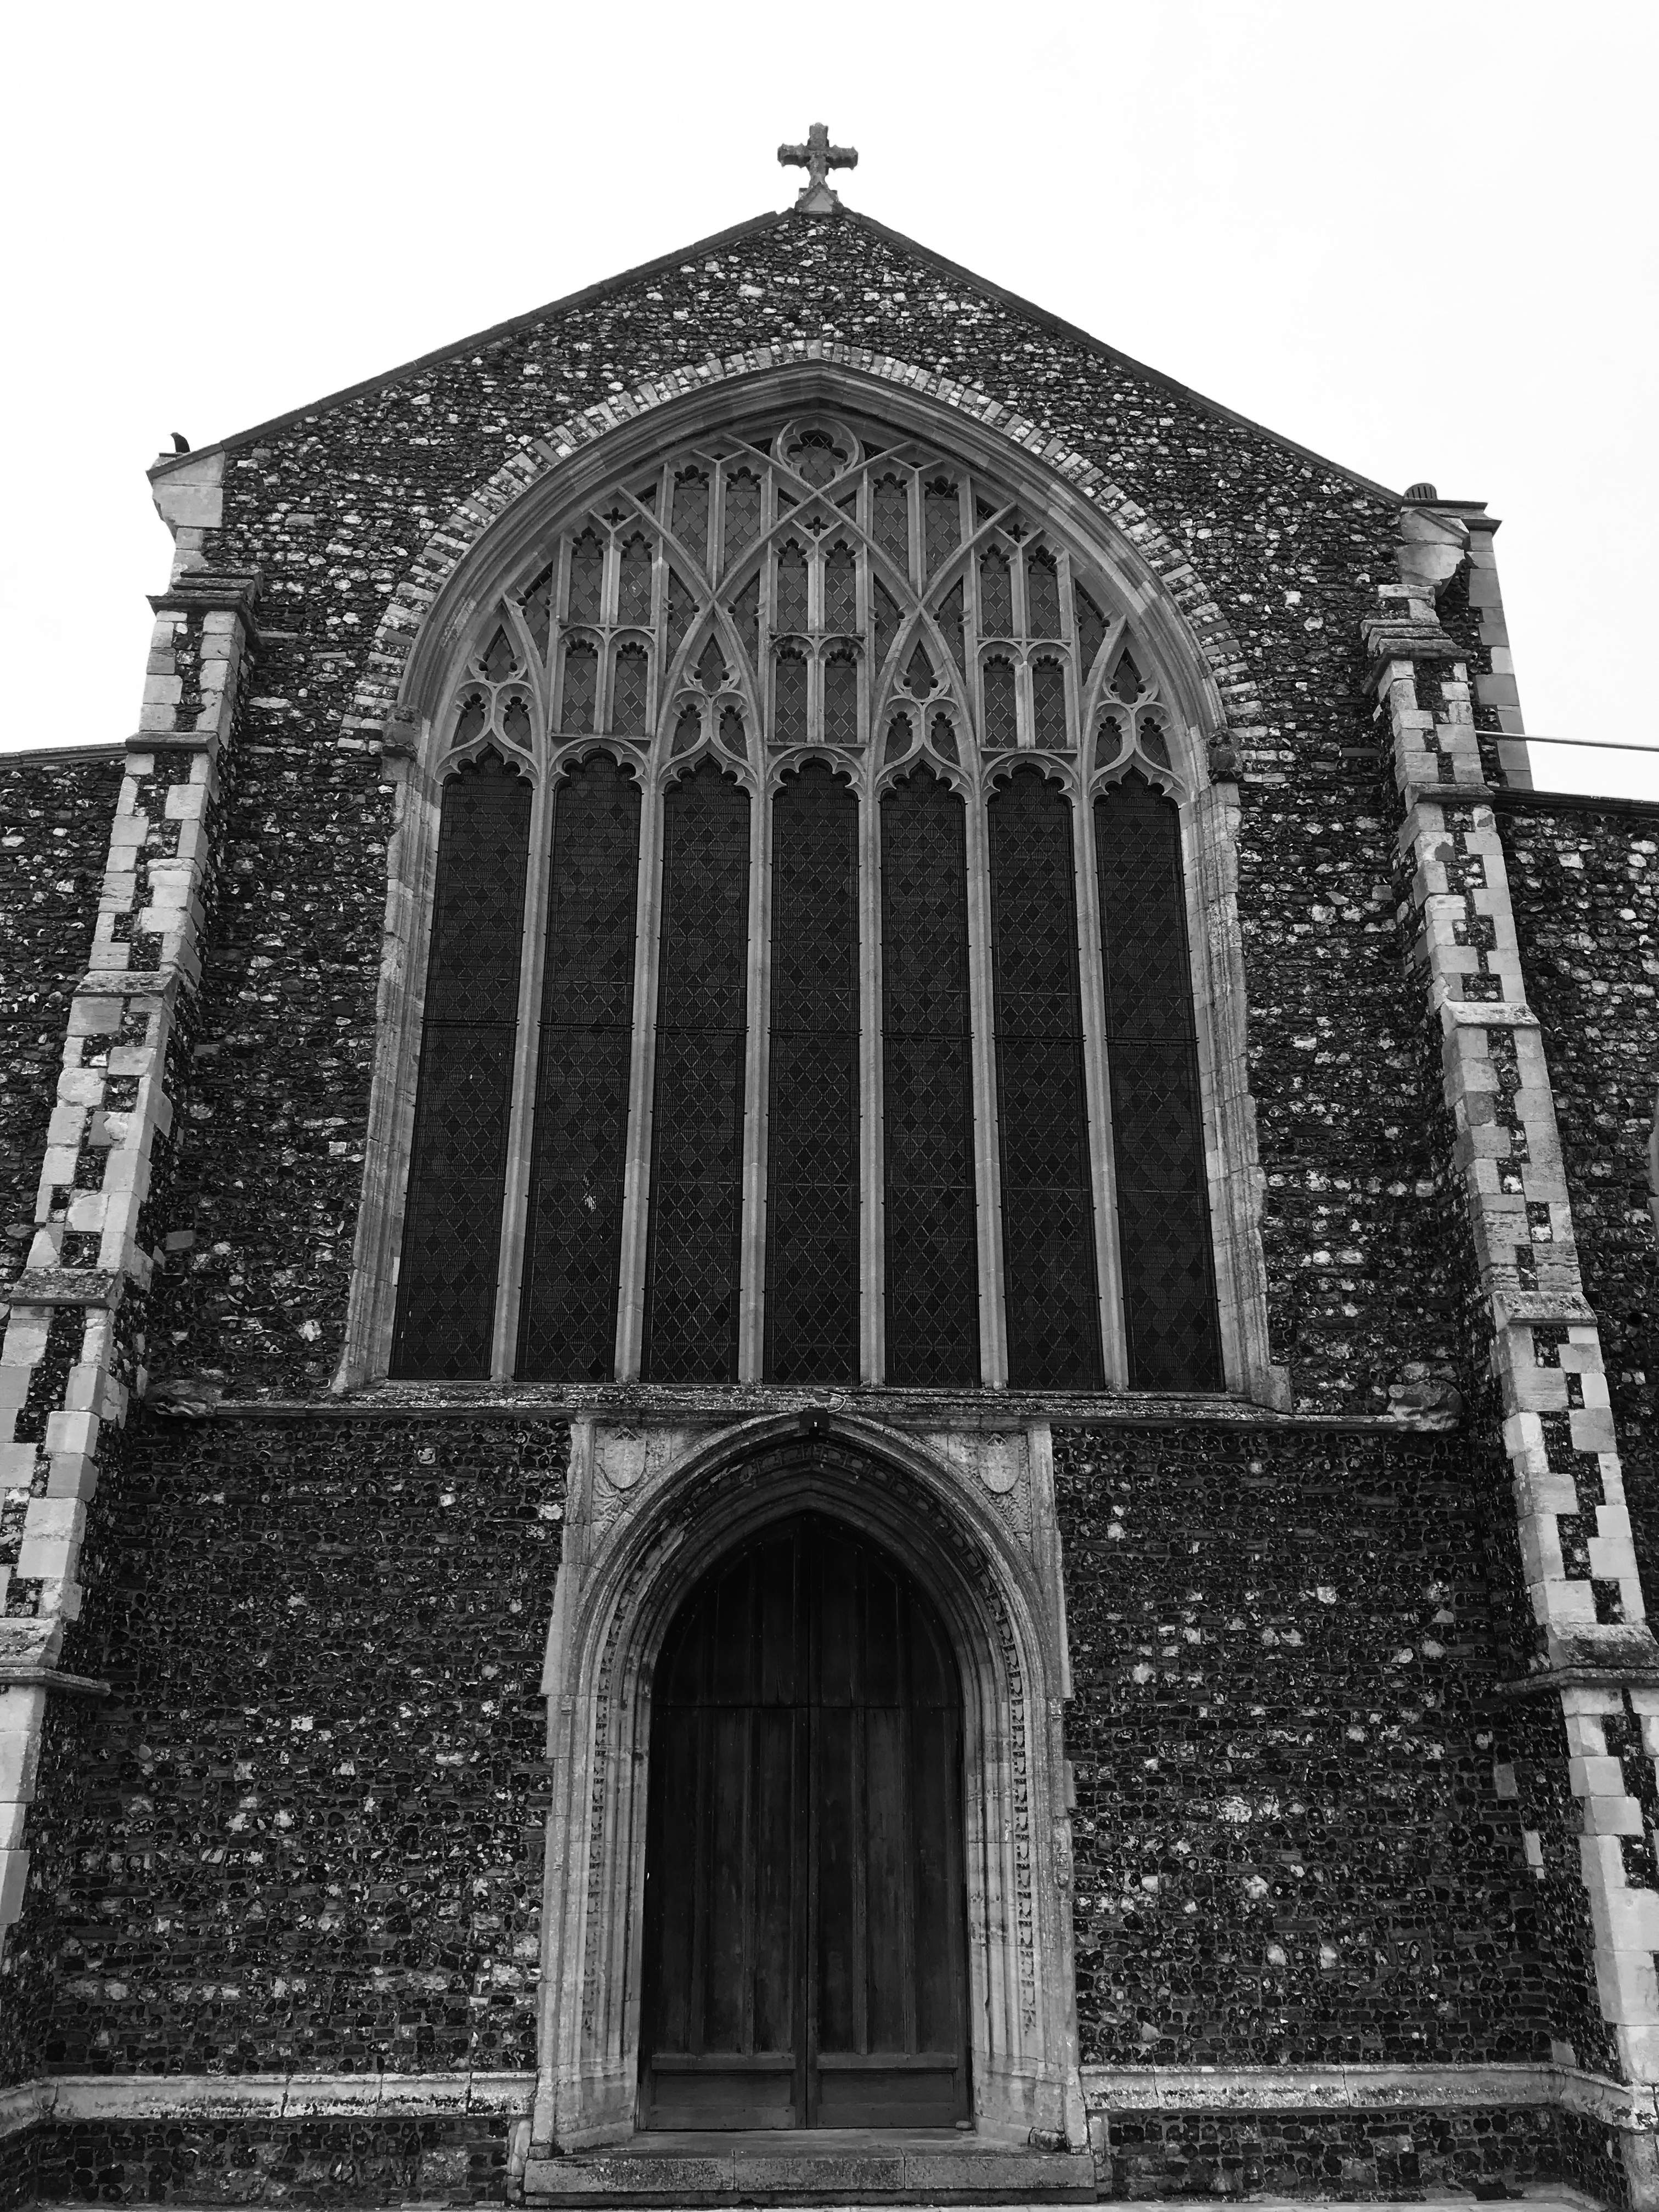 Black and white rendering of the stunning old church